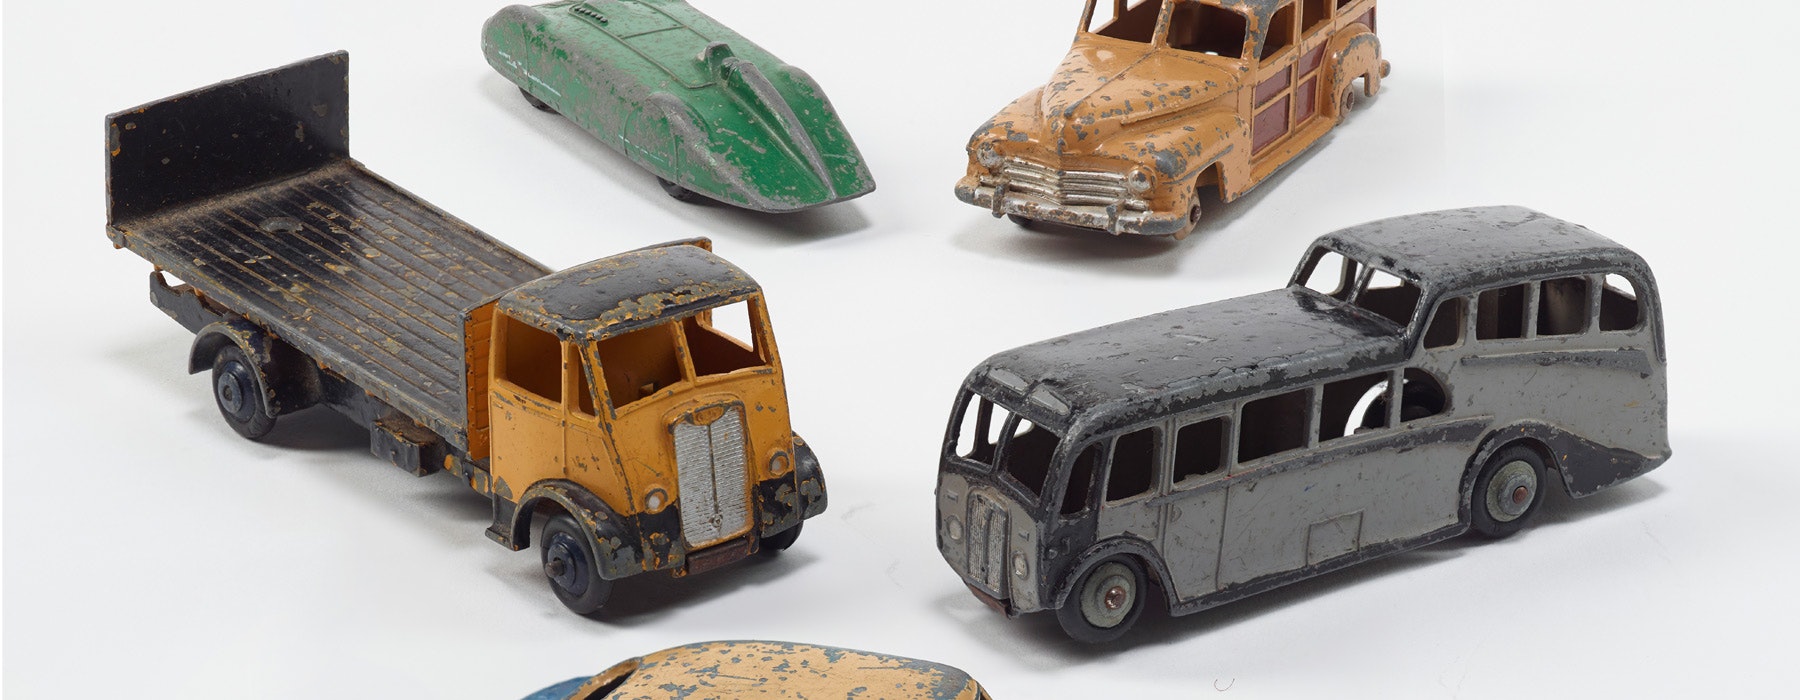 Model Vehicles, circa 1950, by Meccano. Gift of Mrs K Major, 1985. CC BY-NC-ND licence. Te Papa (GH003501/6)